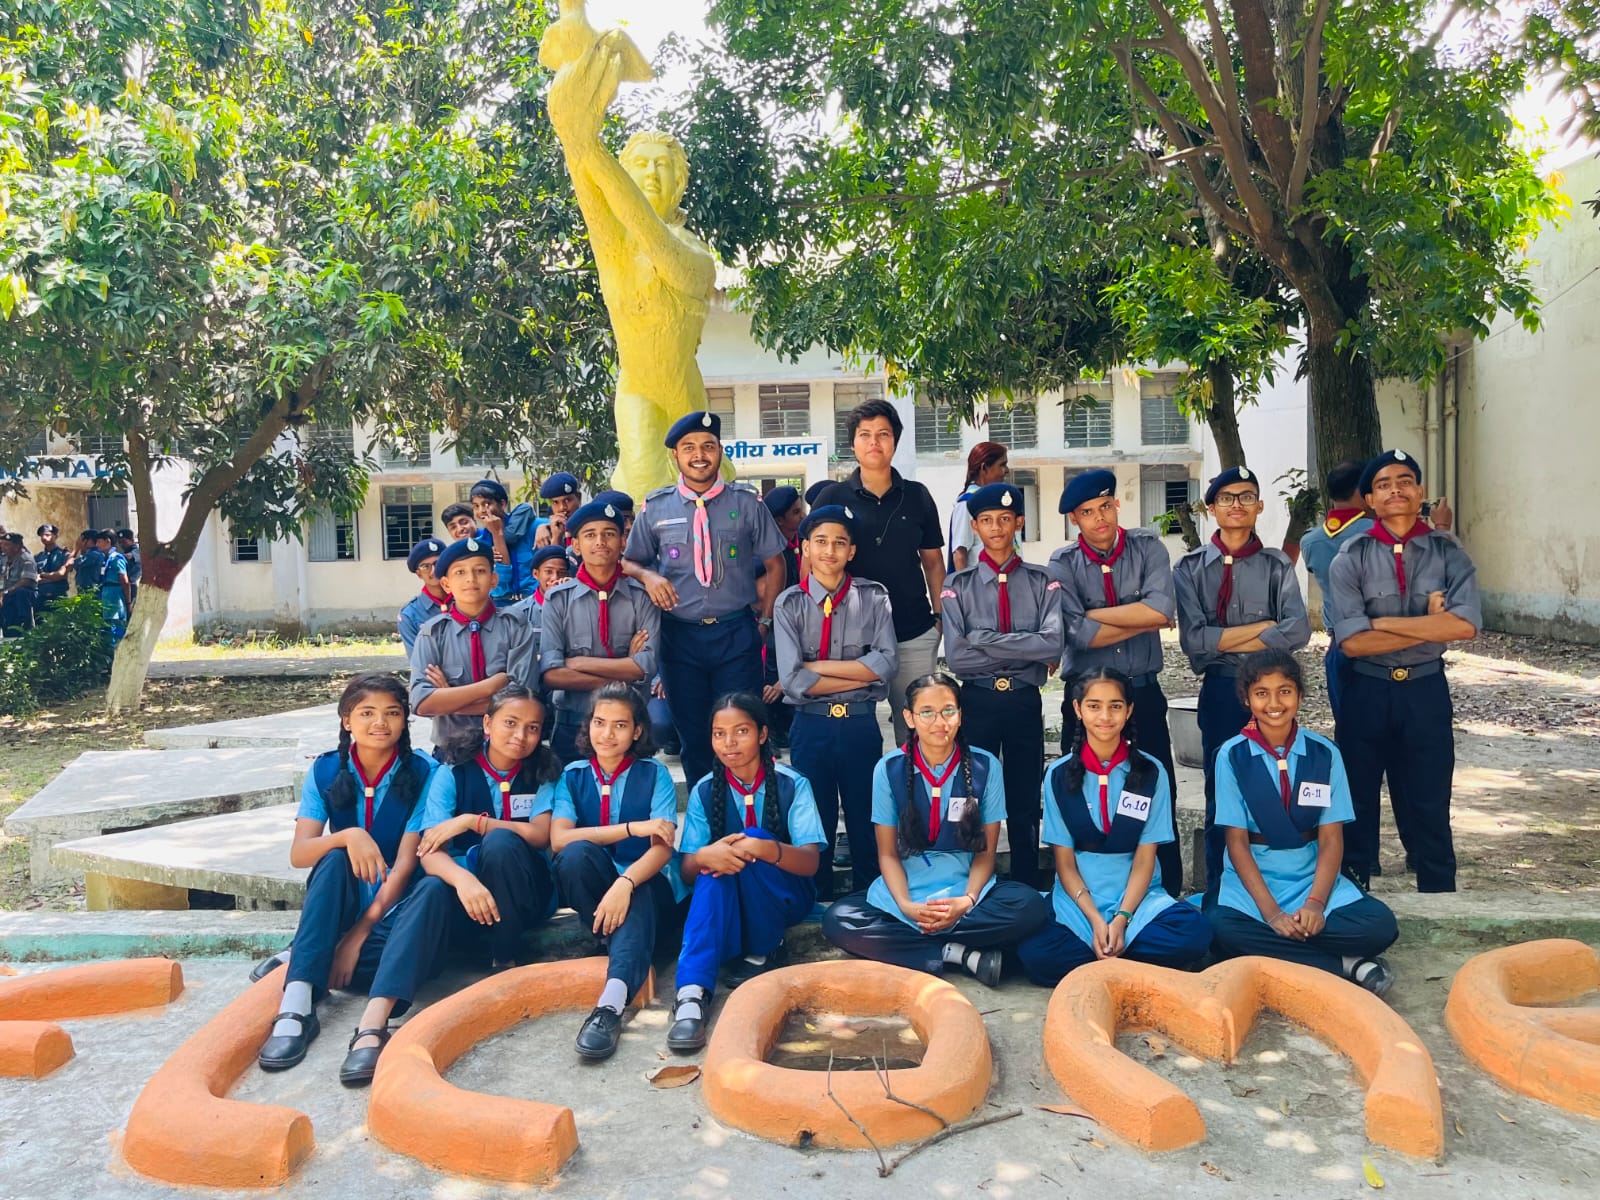 Scouts and Guides